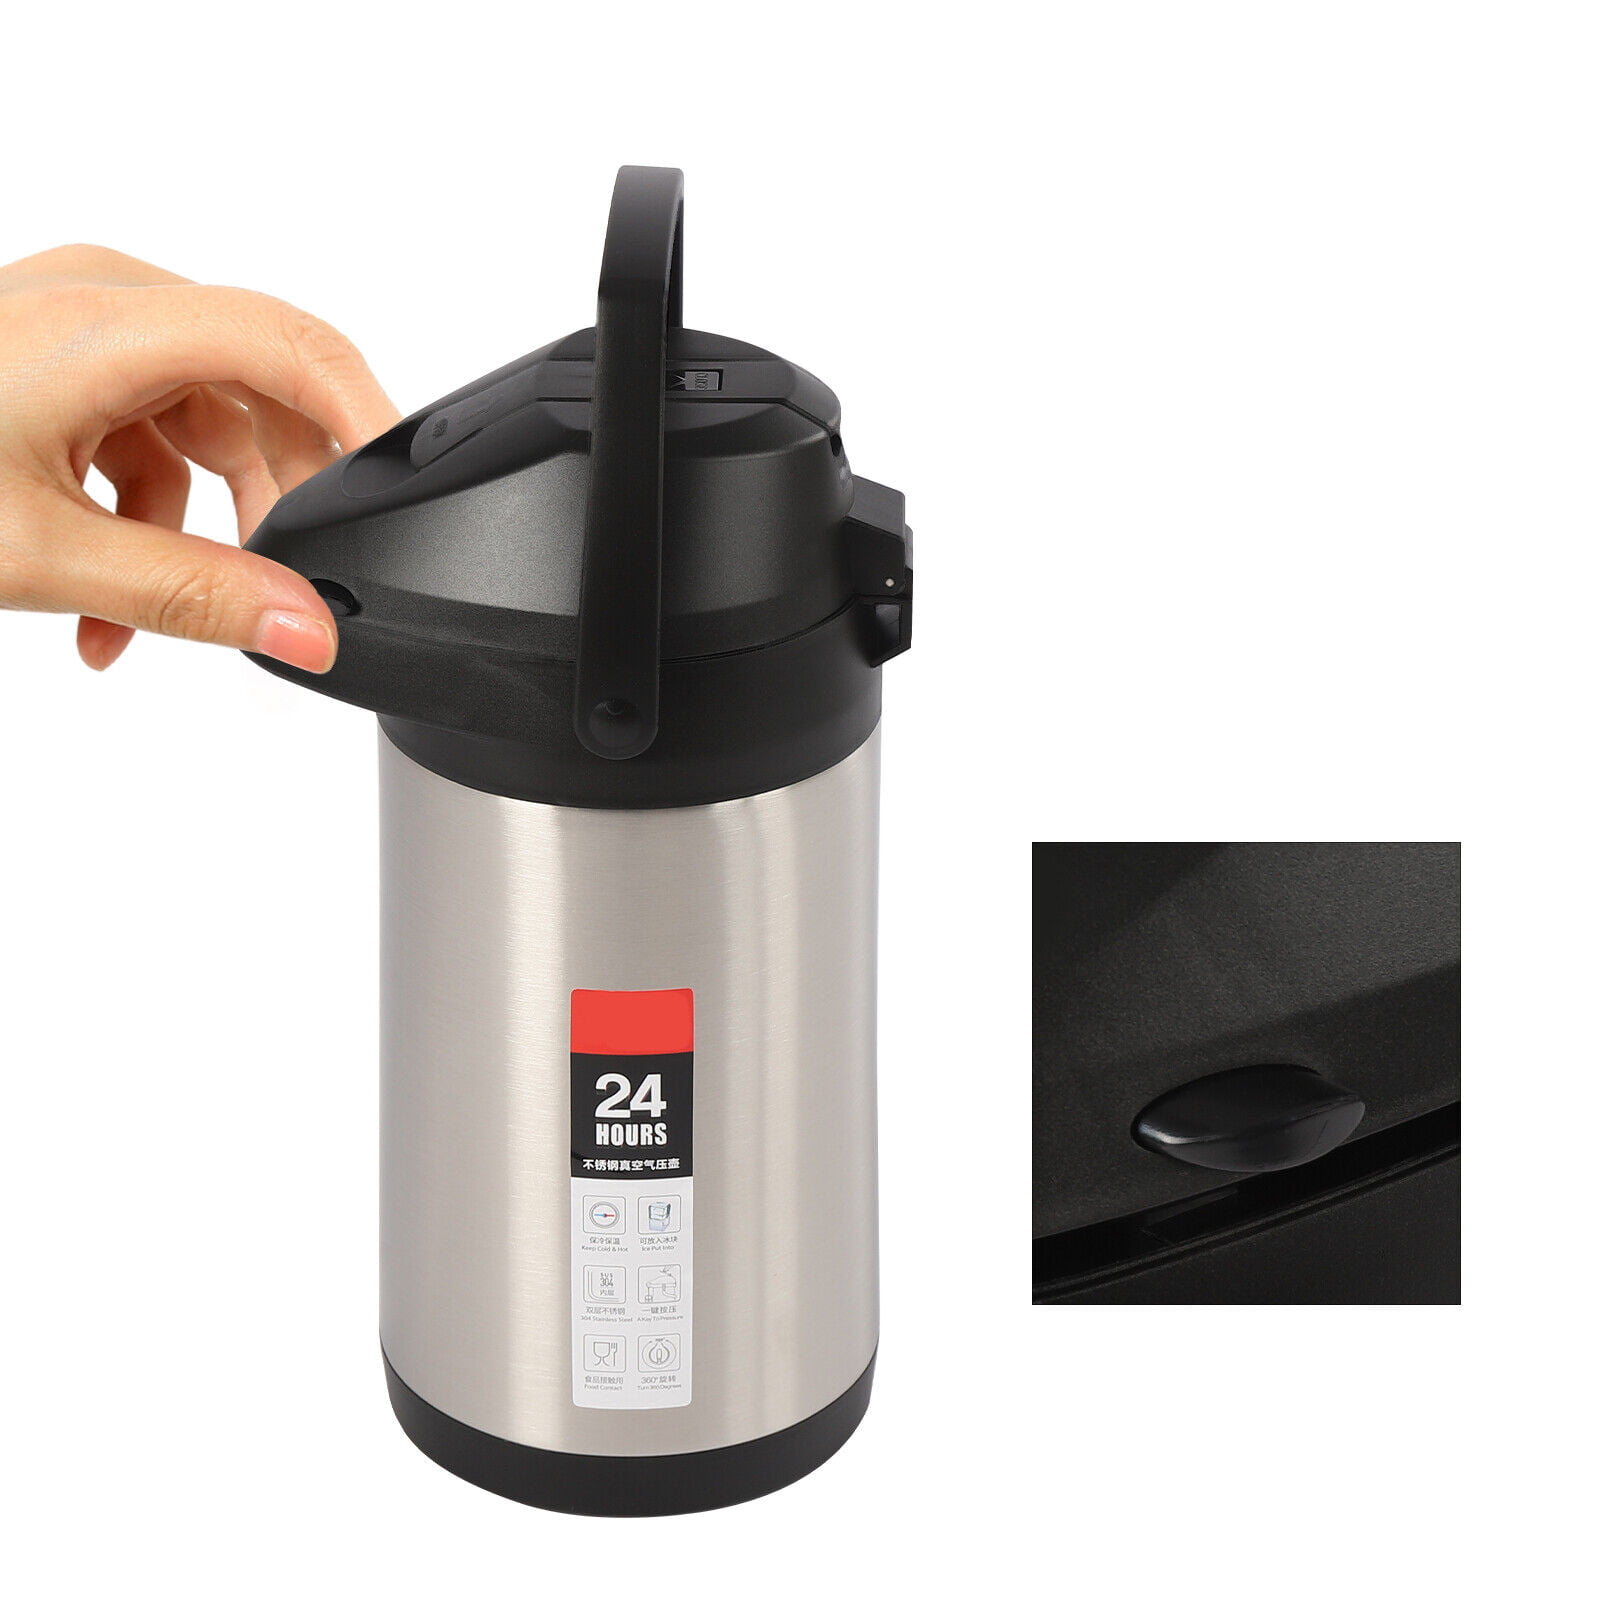 JOYDING 4L/135Oz Thermal Coffee Dispenser Stainless Steel Large Beverage  Dispenser For Hot/Cold Water